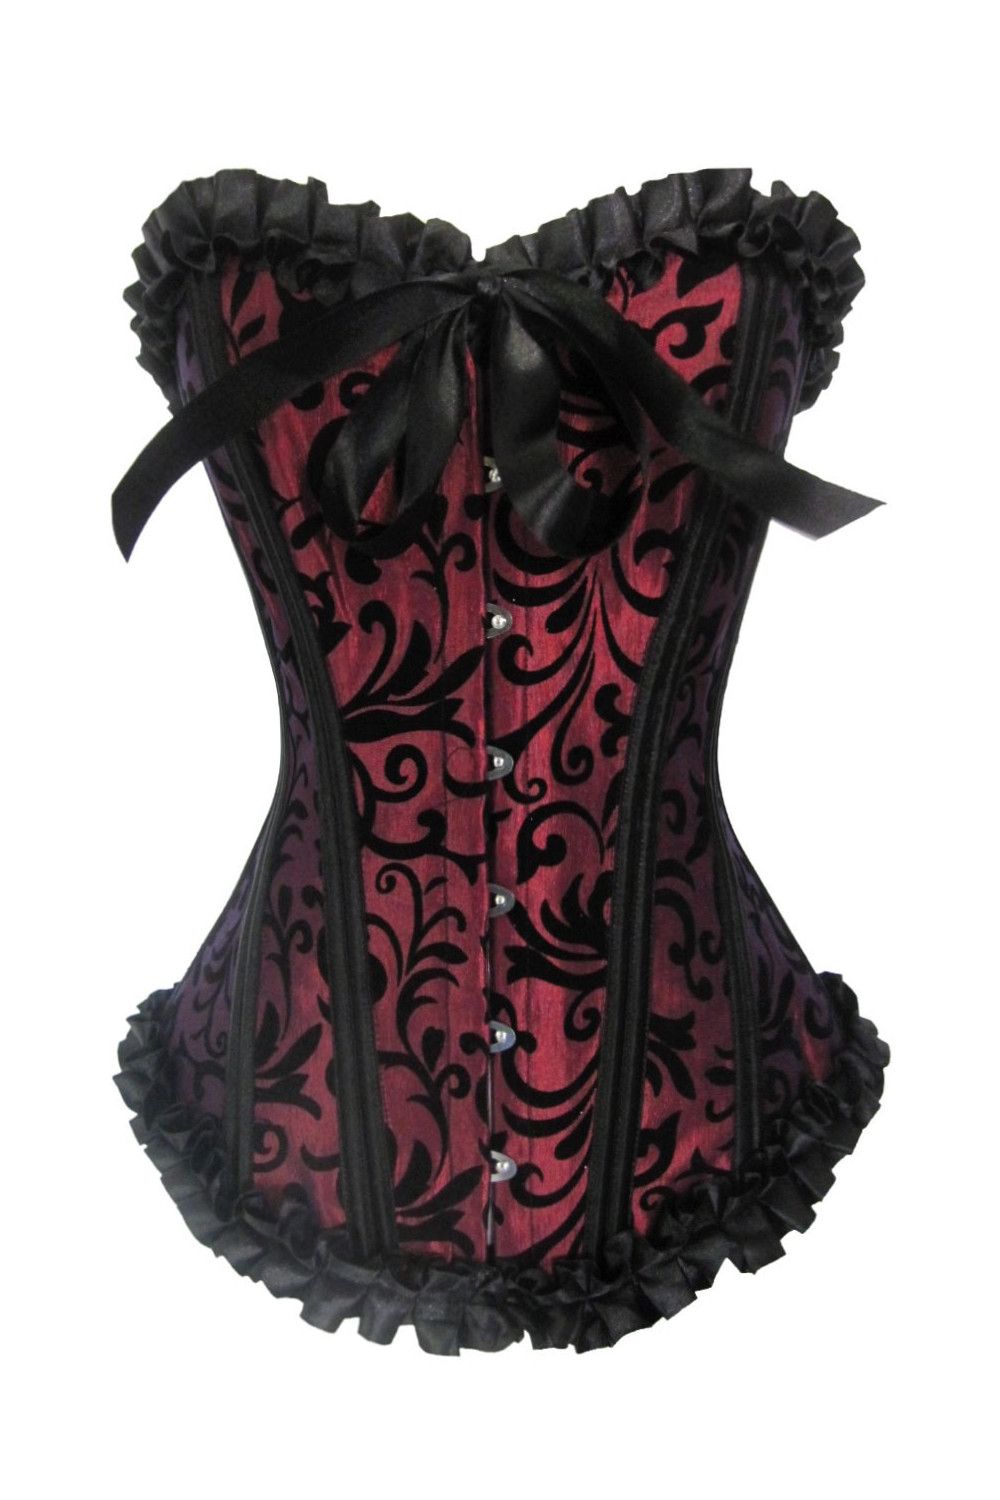 Baroque patterned corset